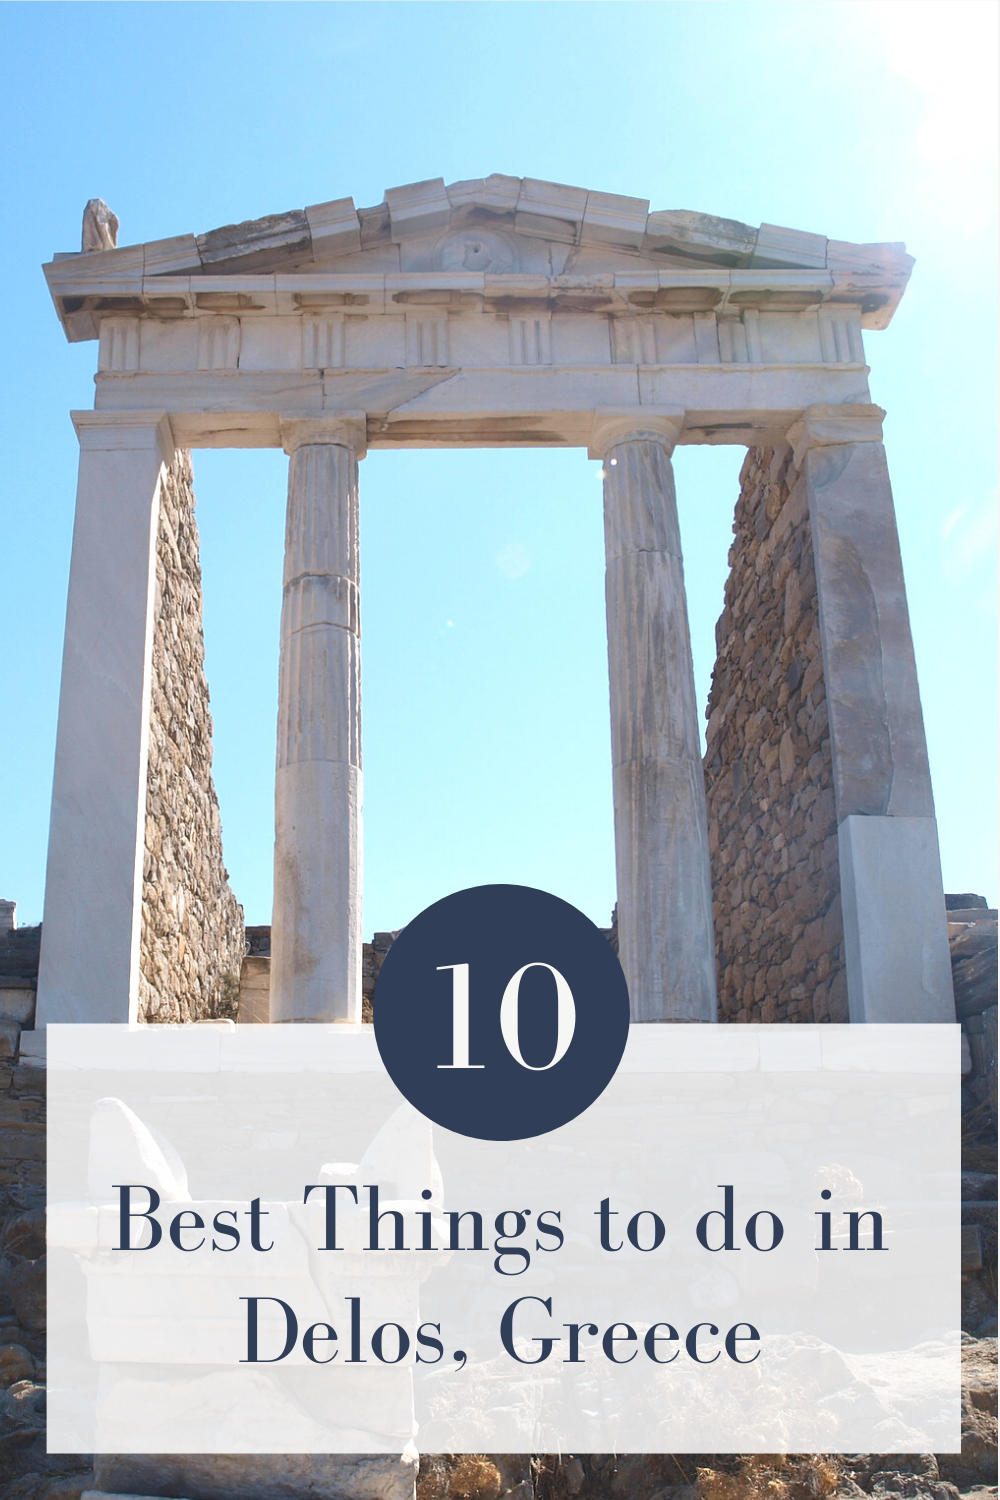 10 Best Things to do in Delos, Greece